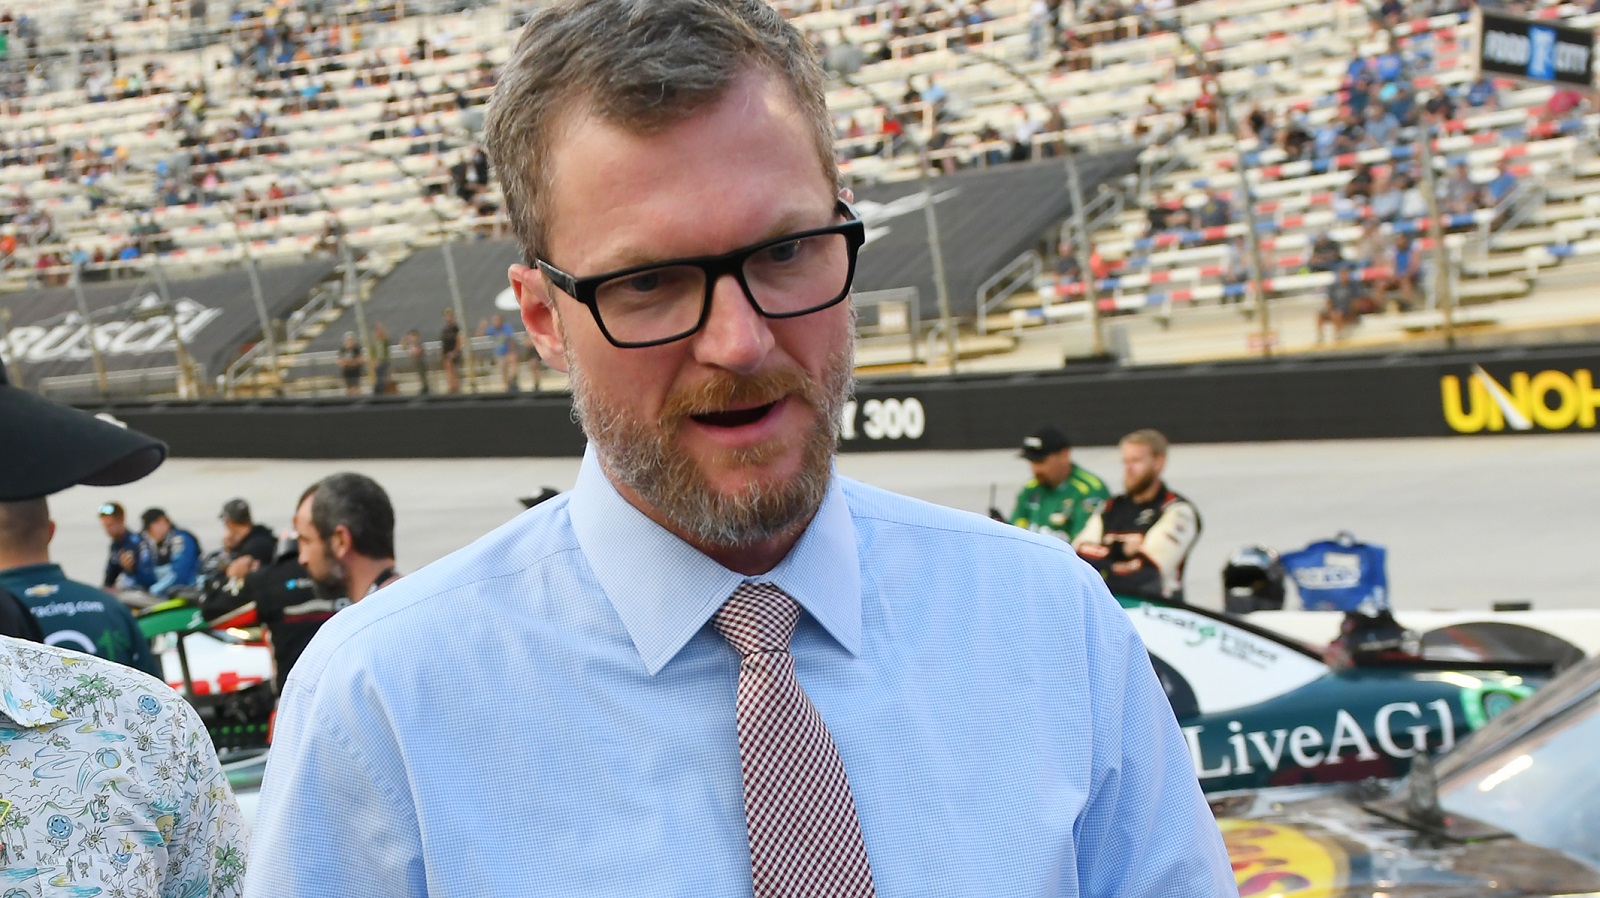 Dale Earnhardt, Jr. before the NASCAR Xfinity Series Food City 300 on Sept. 16, 2022 at Bristol Motor Speedway.